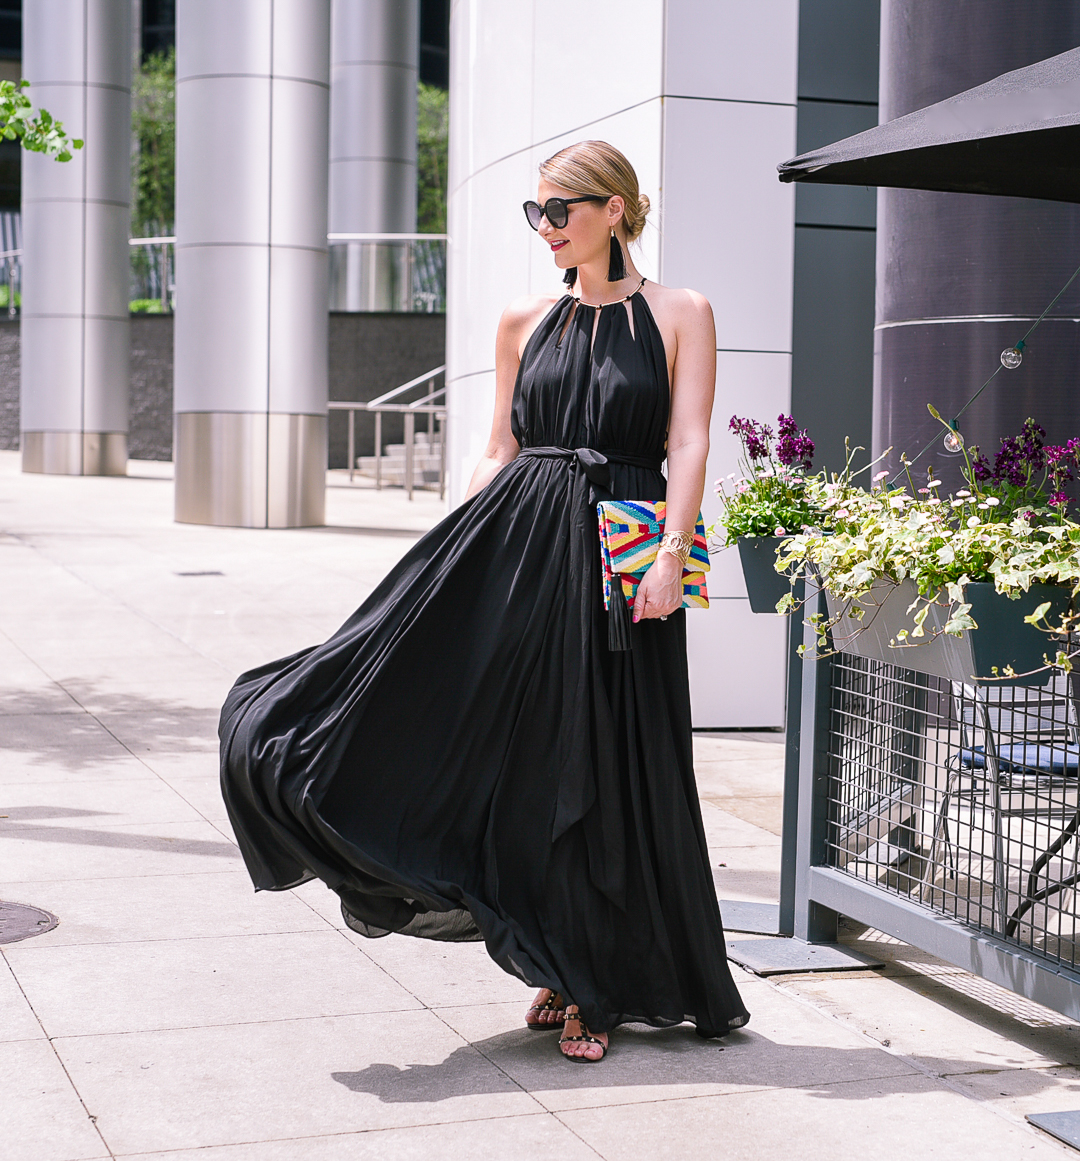 how to dress for a fancy event for under $60